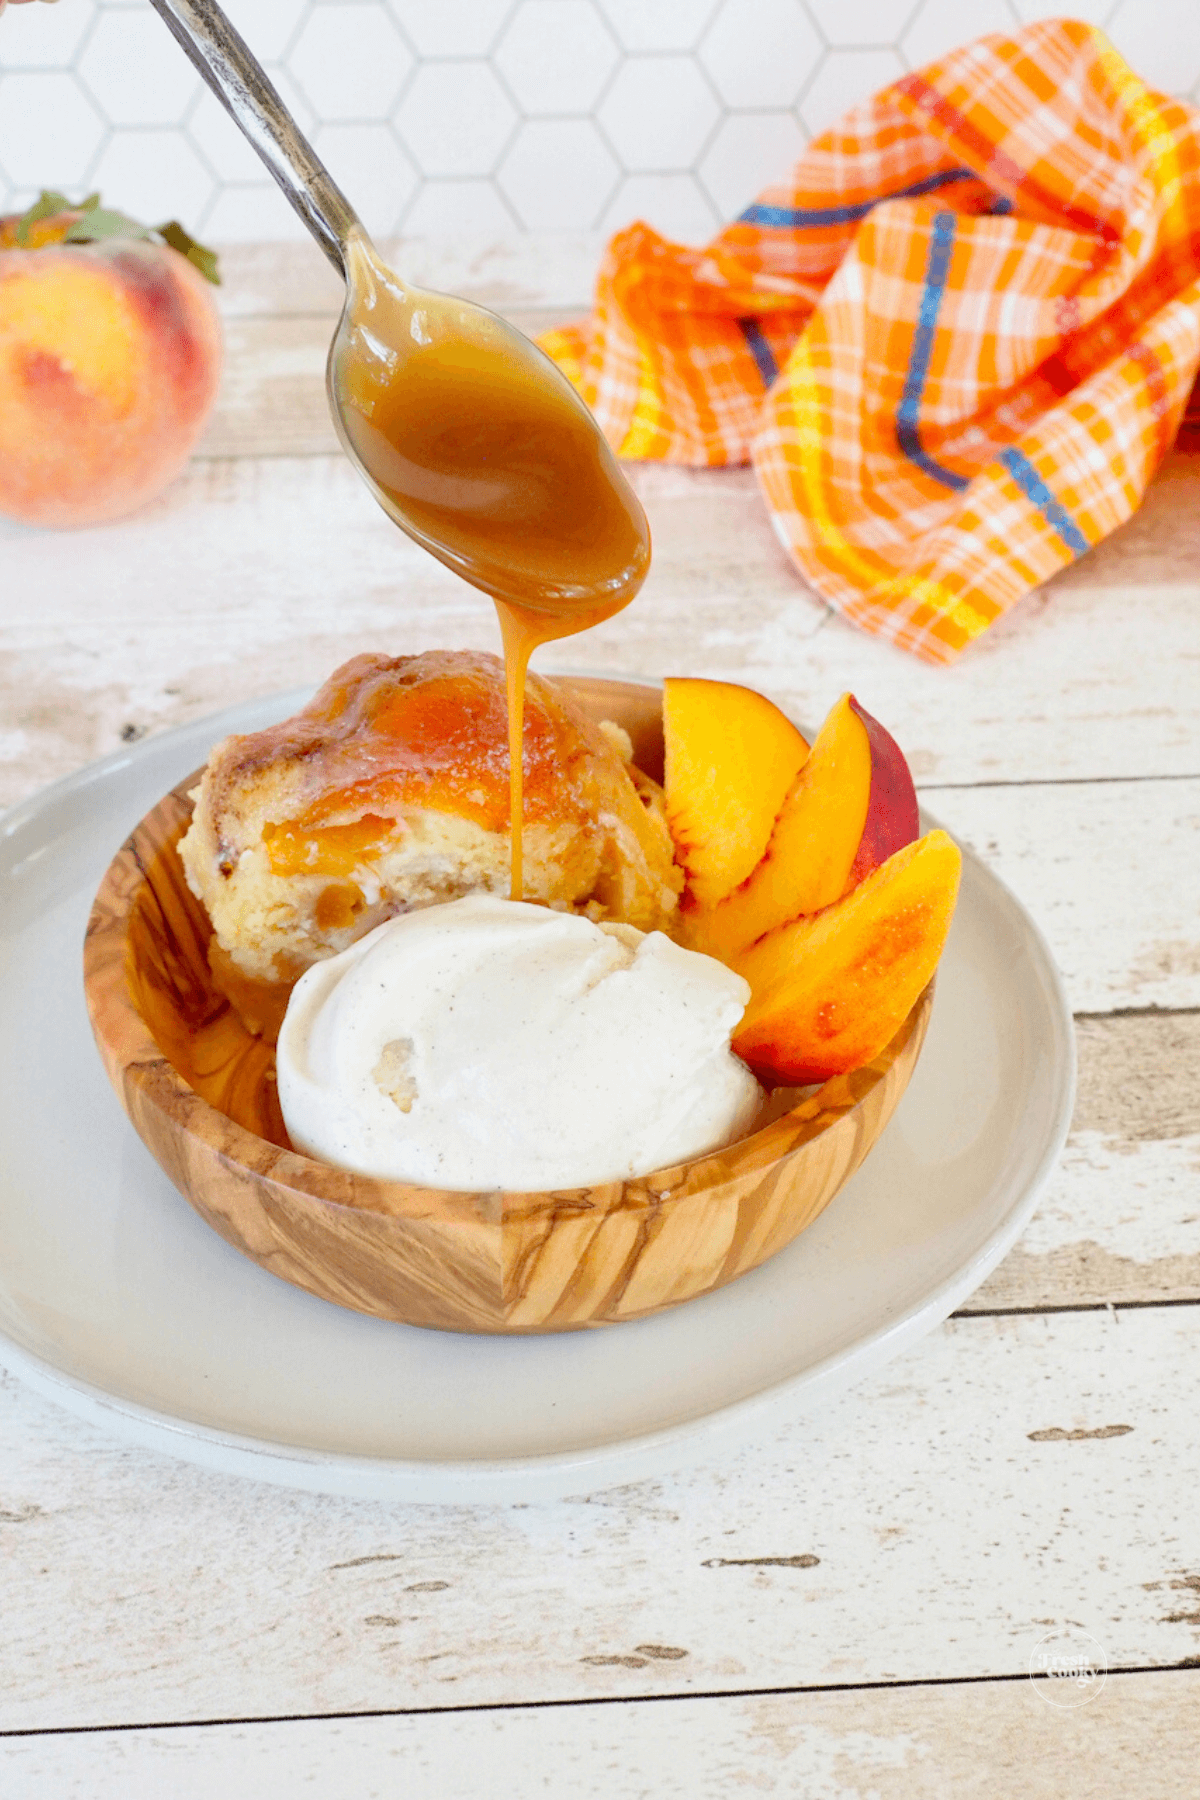 Drizzling caramel on peach pound cake with ice cream.